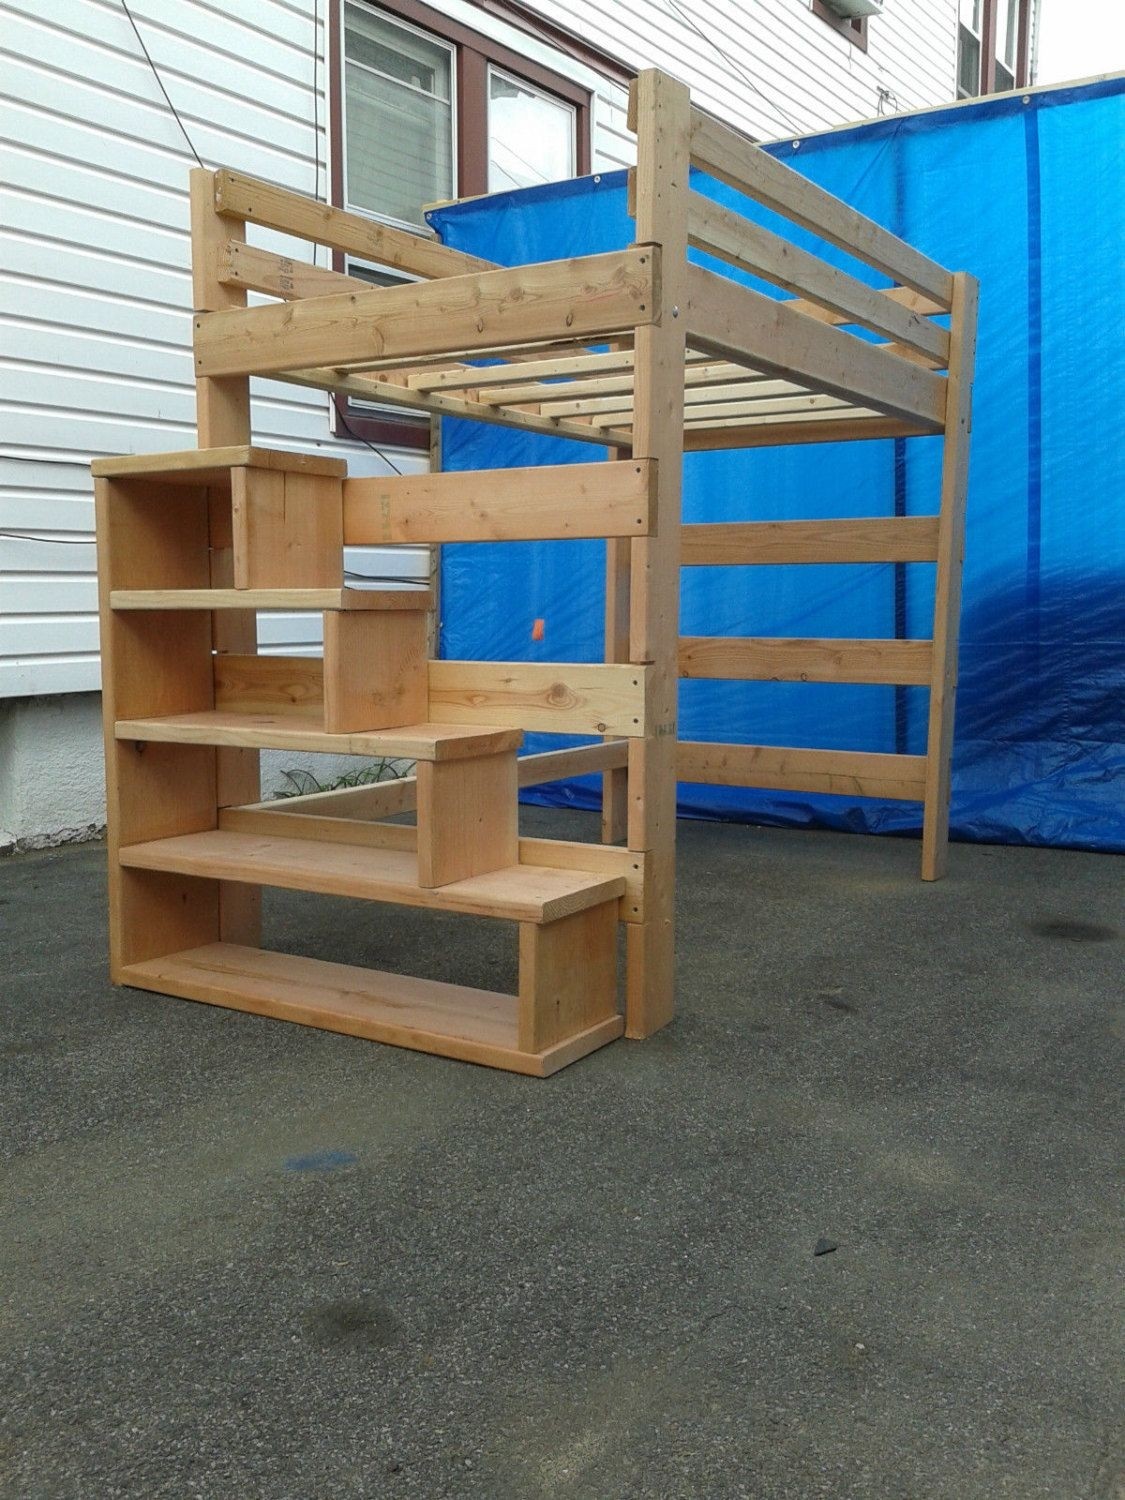 full loft bed with steps